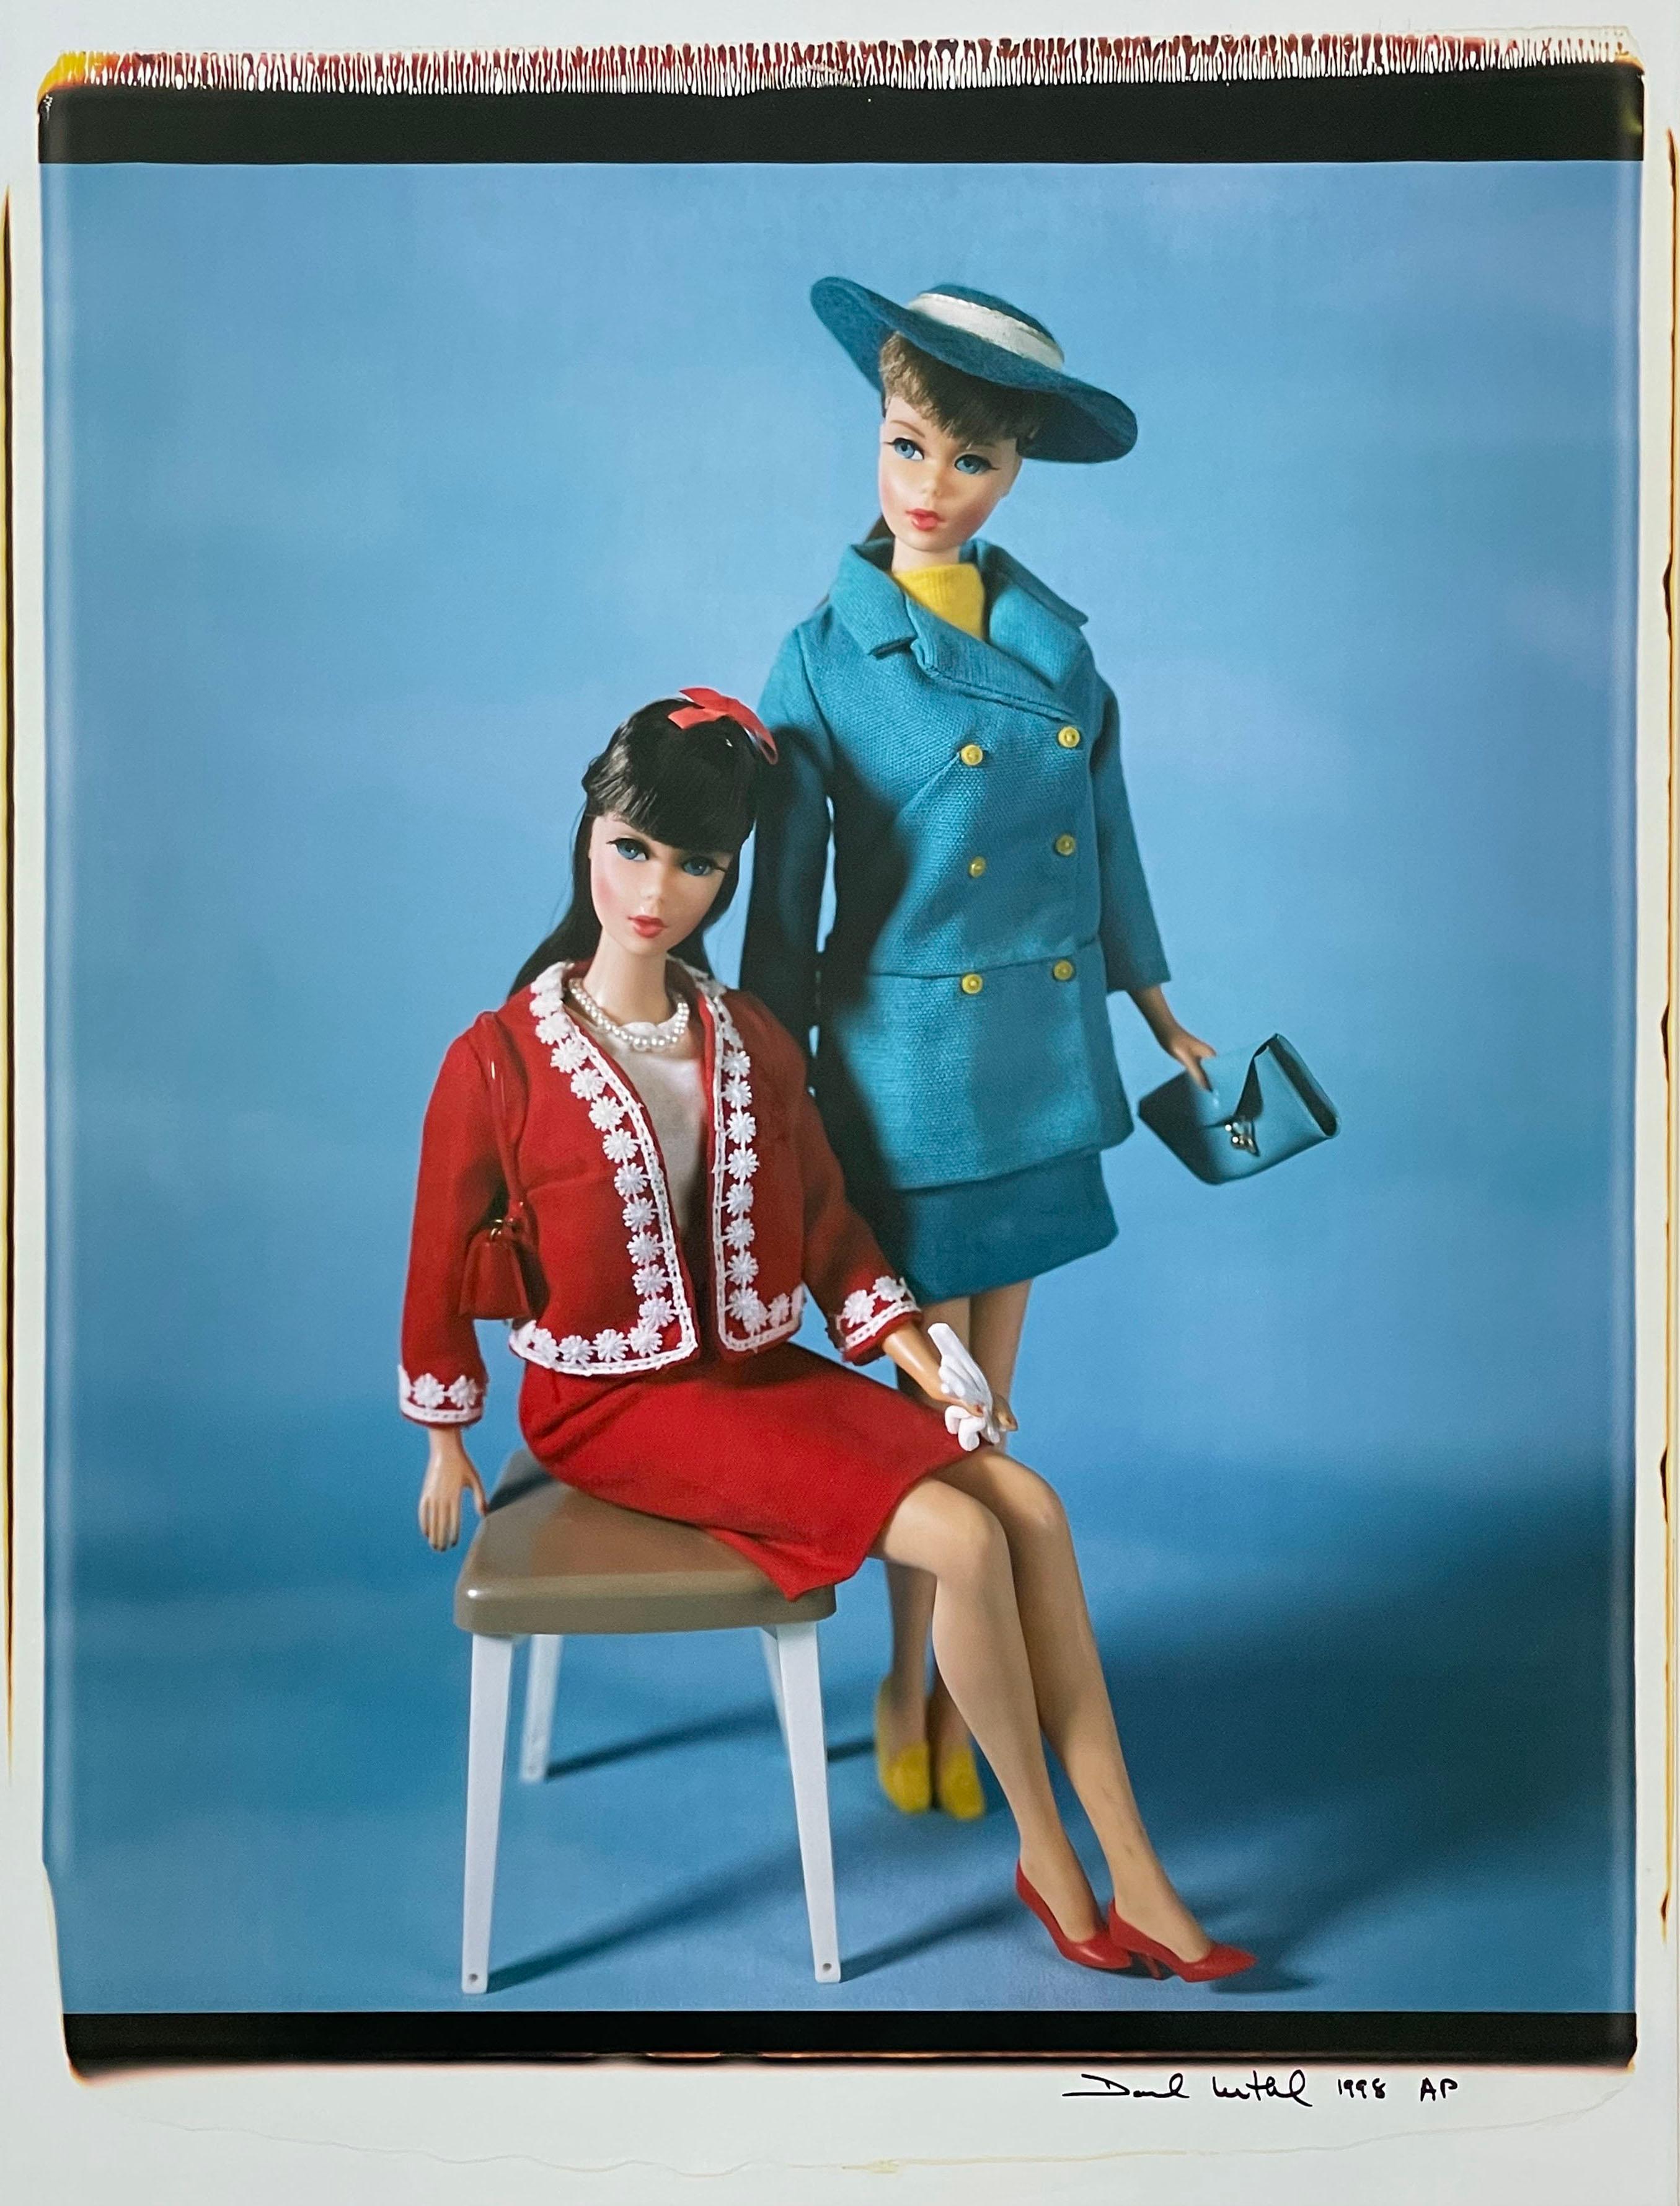 David Levinthal Color Photograph - Untitled from Barbie (Blue Ladies, BAR 62)